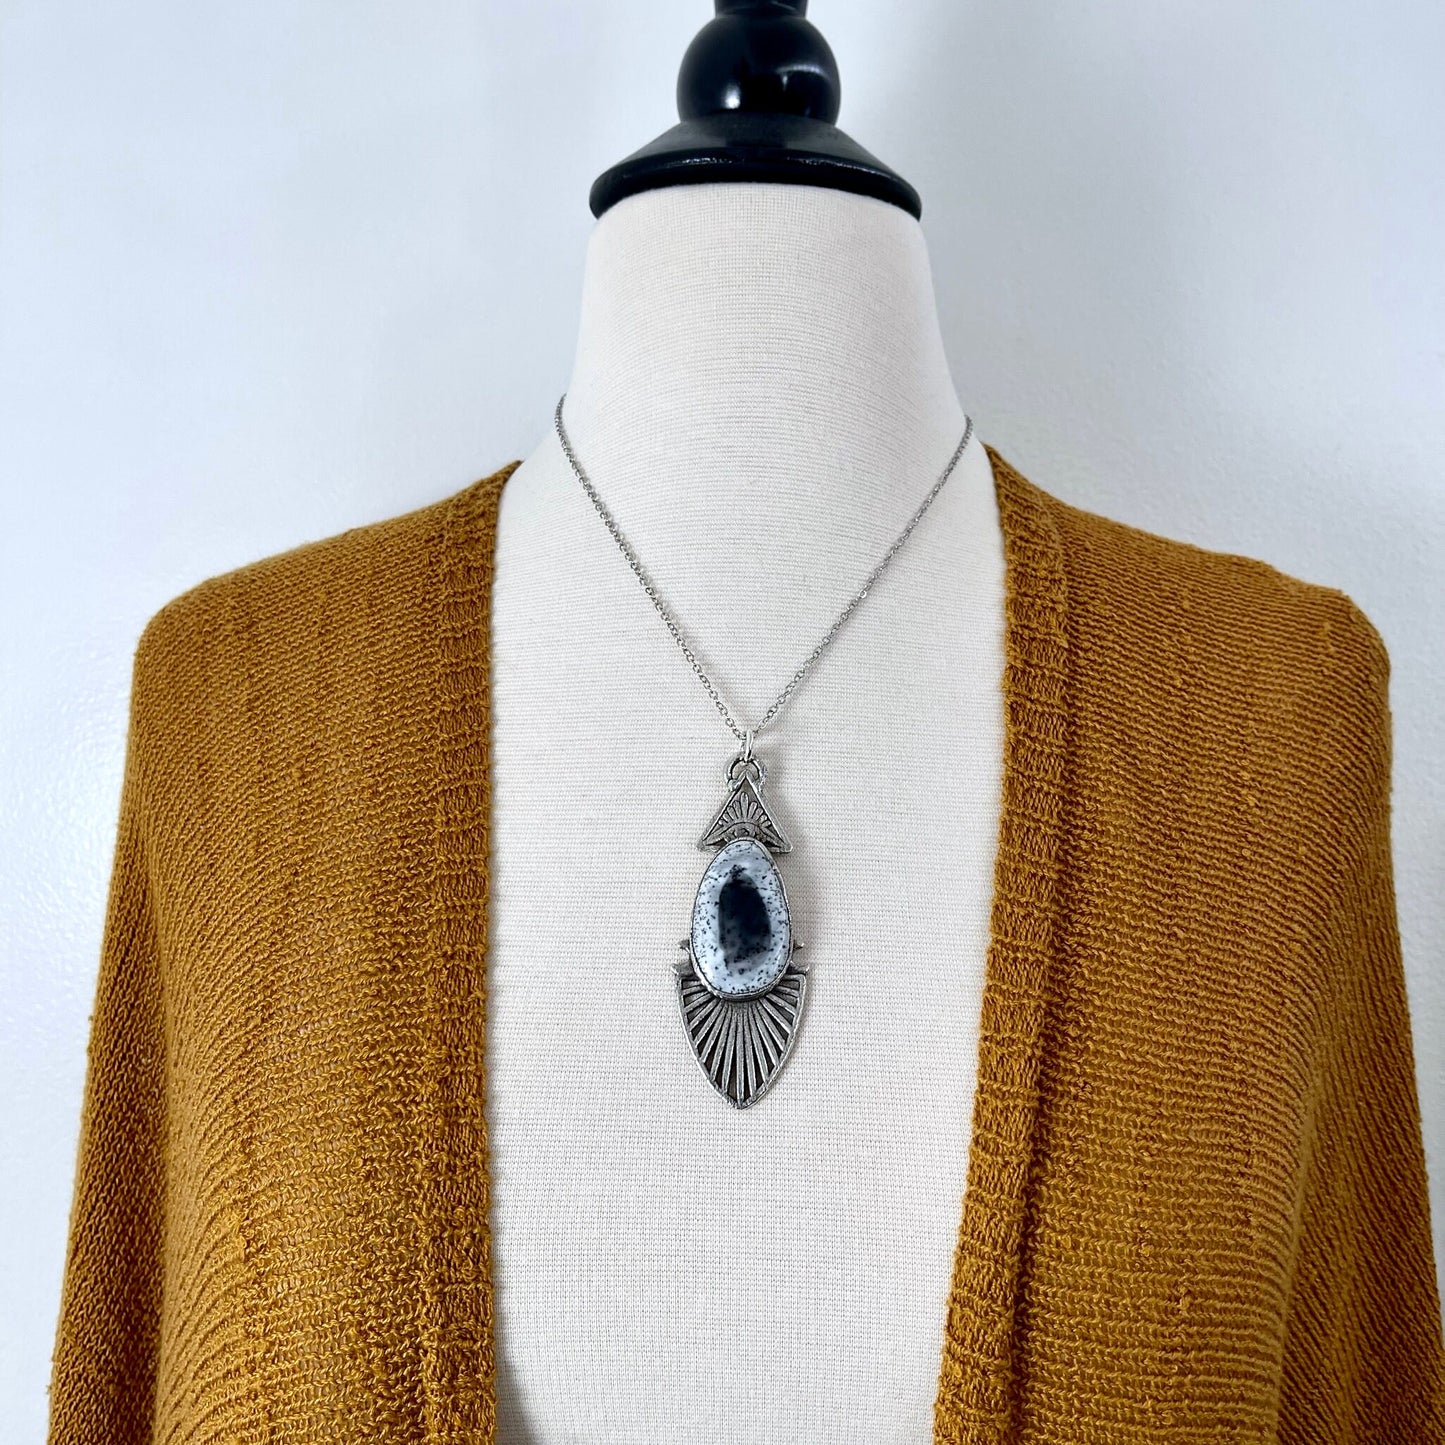 Big Crystal Necklace, Big Stone Necklace, Bohemian Jewelry, Crystal Necklaces, Etsy ID: 1570947535, Foxlark Alchemy, FOXLARK- NECKLACES, Gothic Jewelry, Jewelry, Large Crystal, Large Raw Crystal, layering necklace, Necklaces, Raw crystal jewelry, raw crys